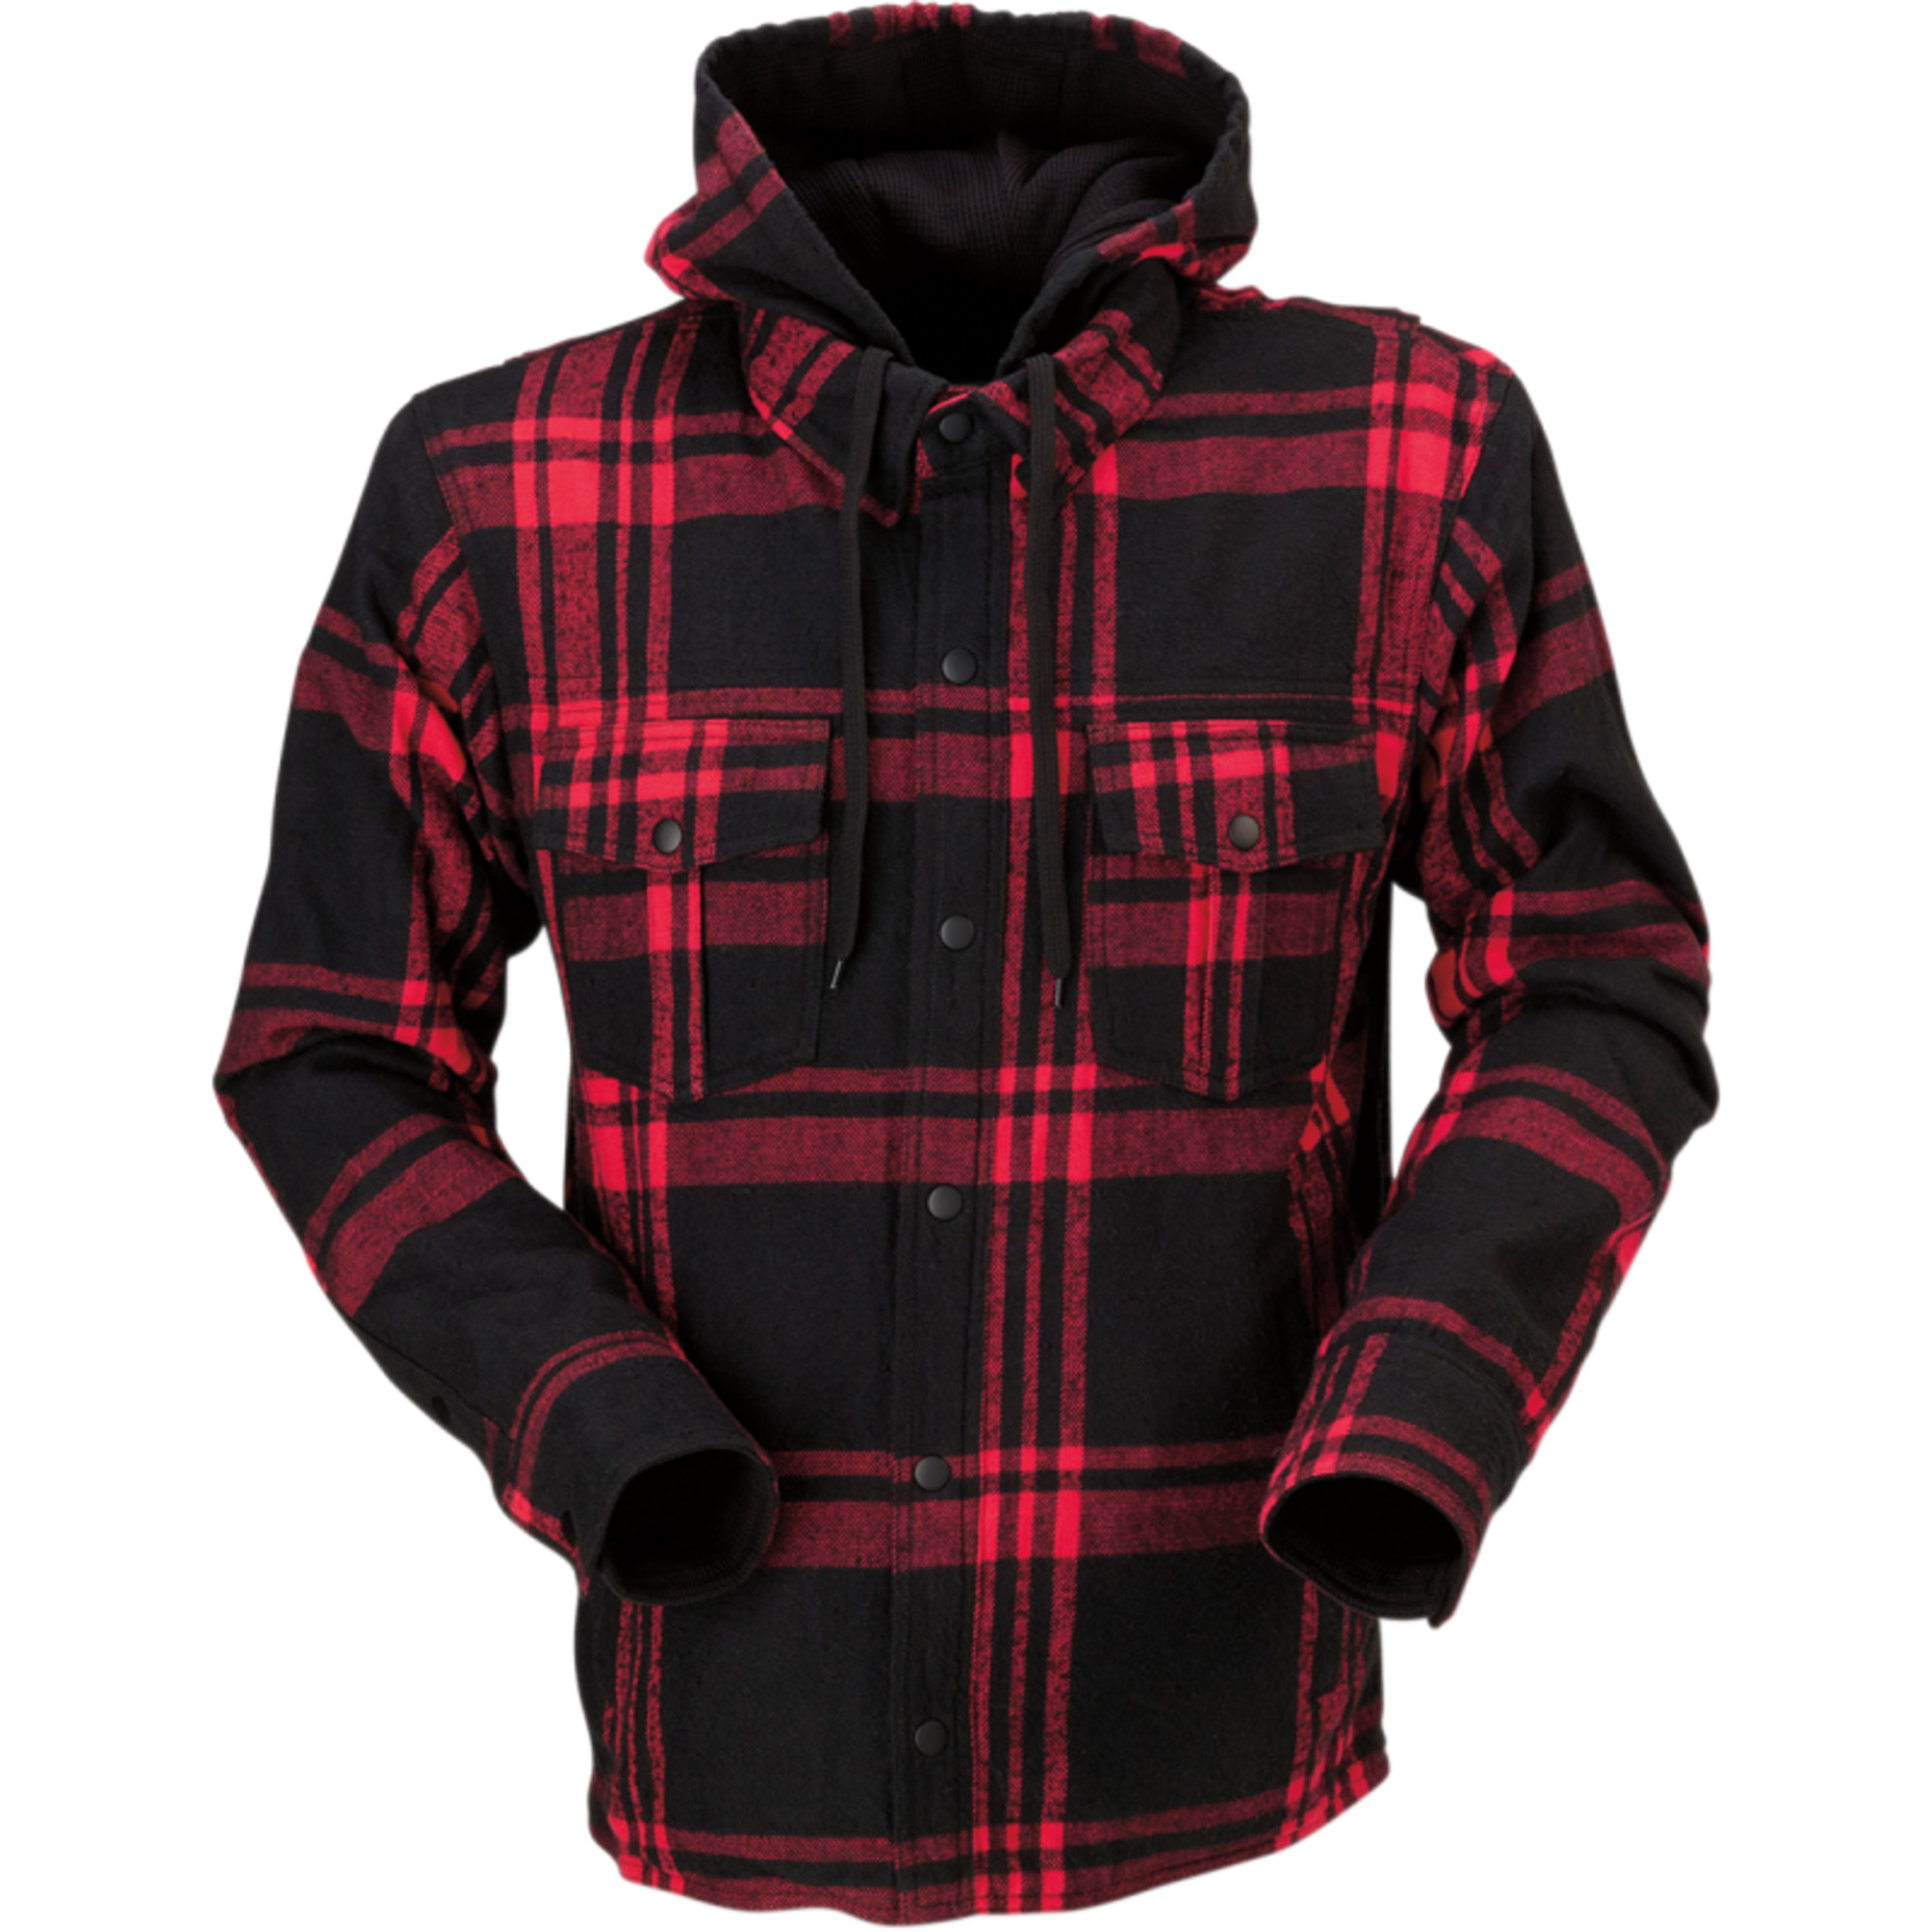  s timber flannel